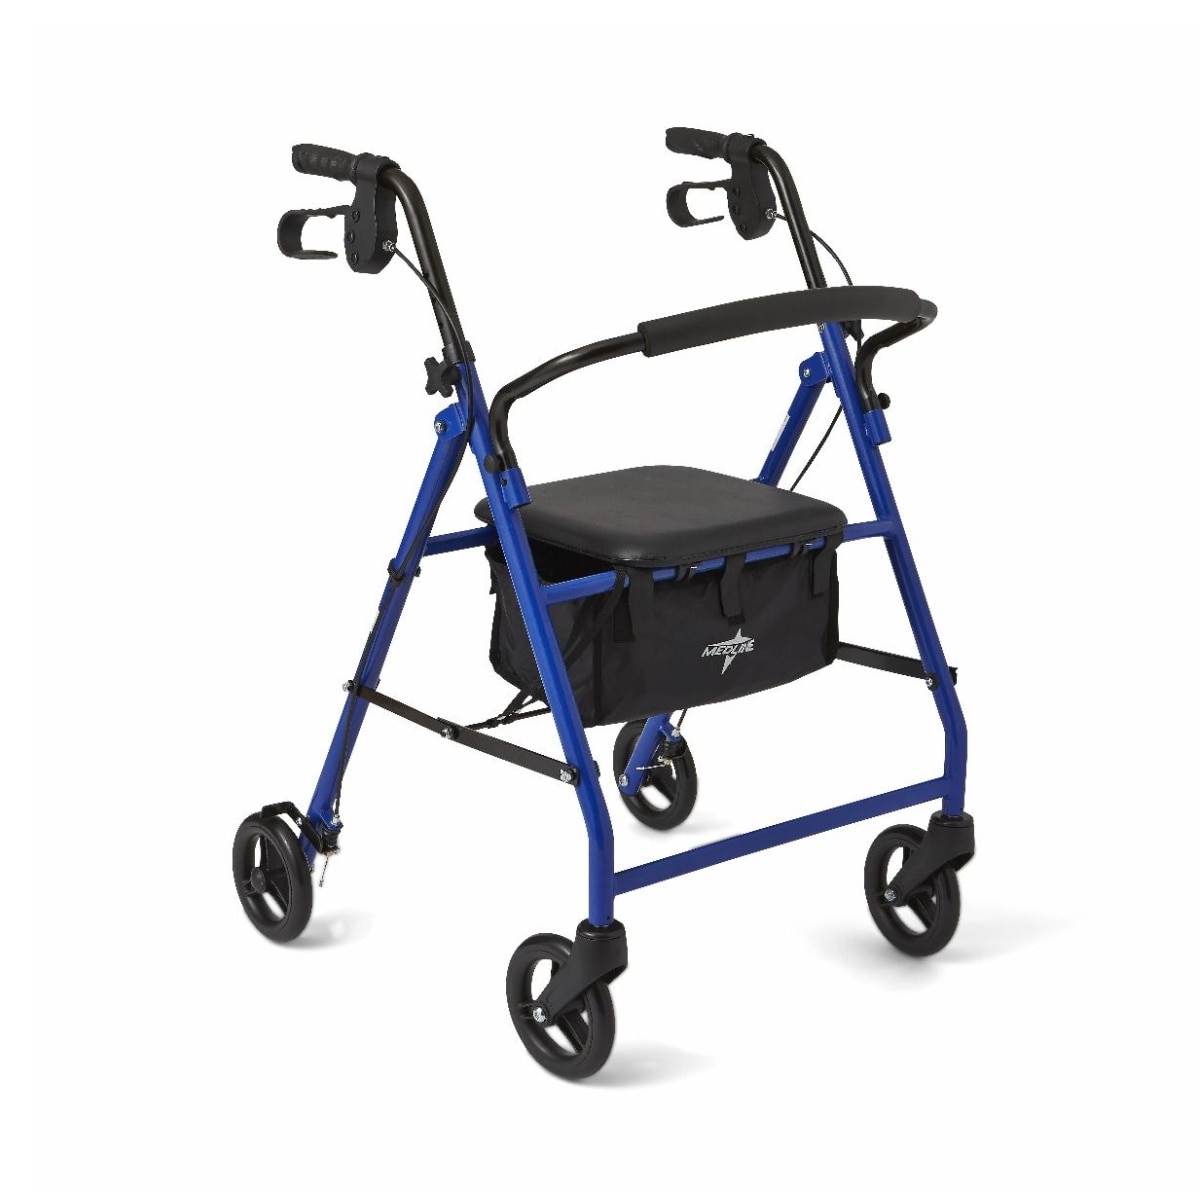 Medline Aluminum rollator walker with a simple, black frame and square seat